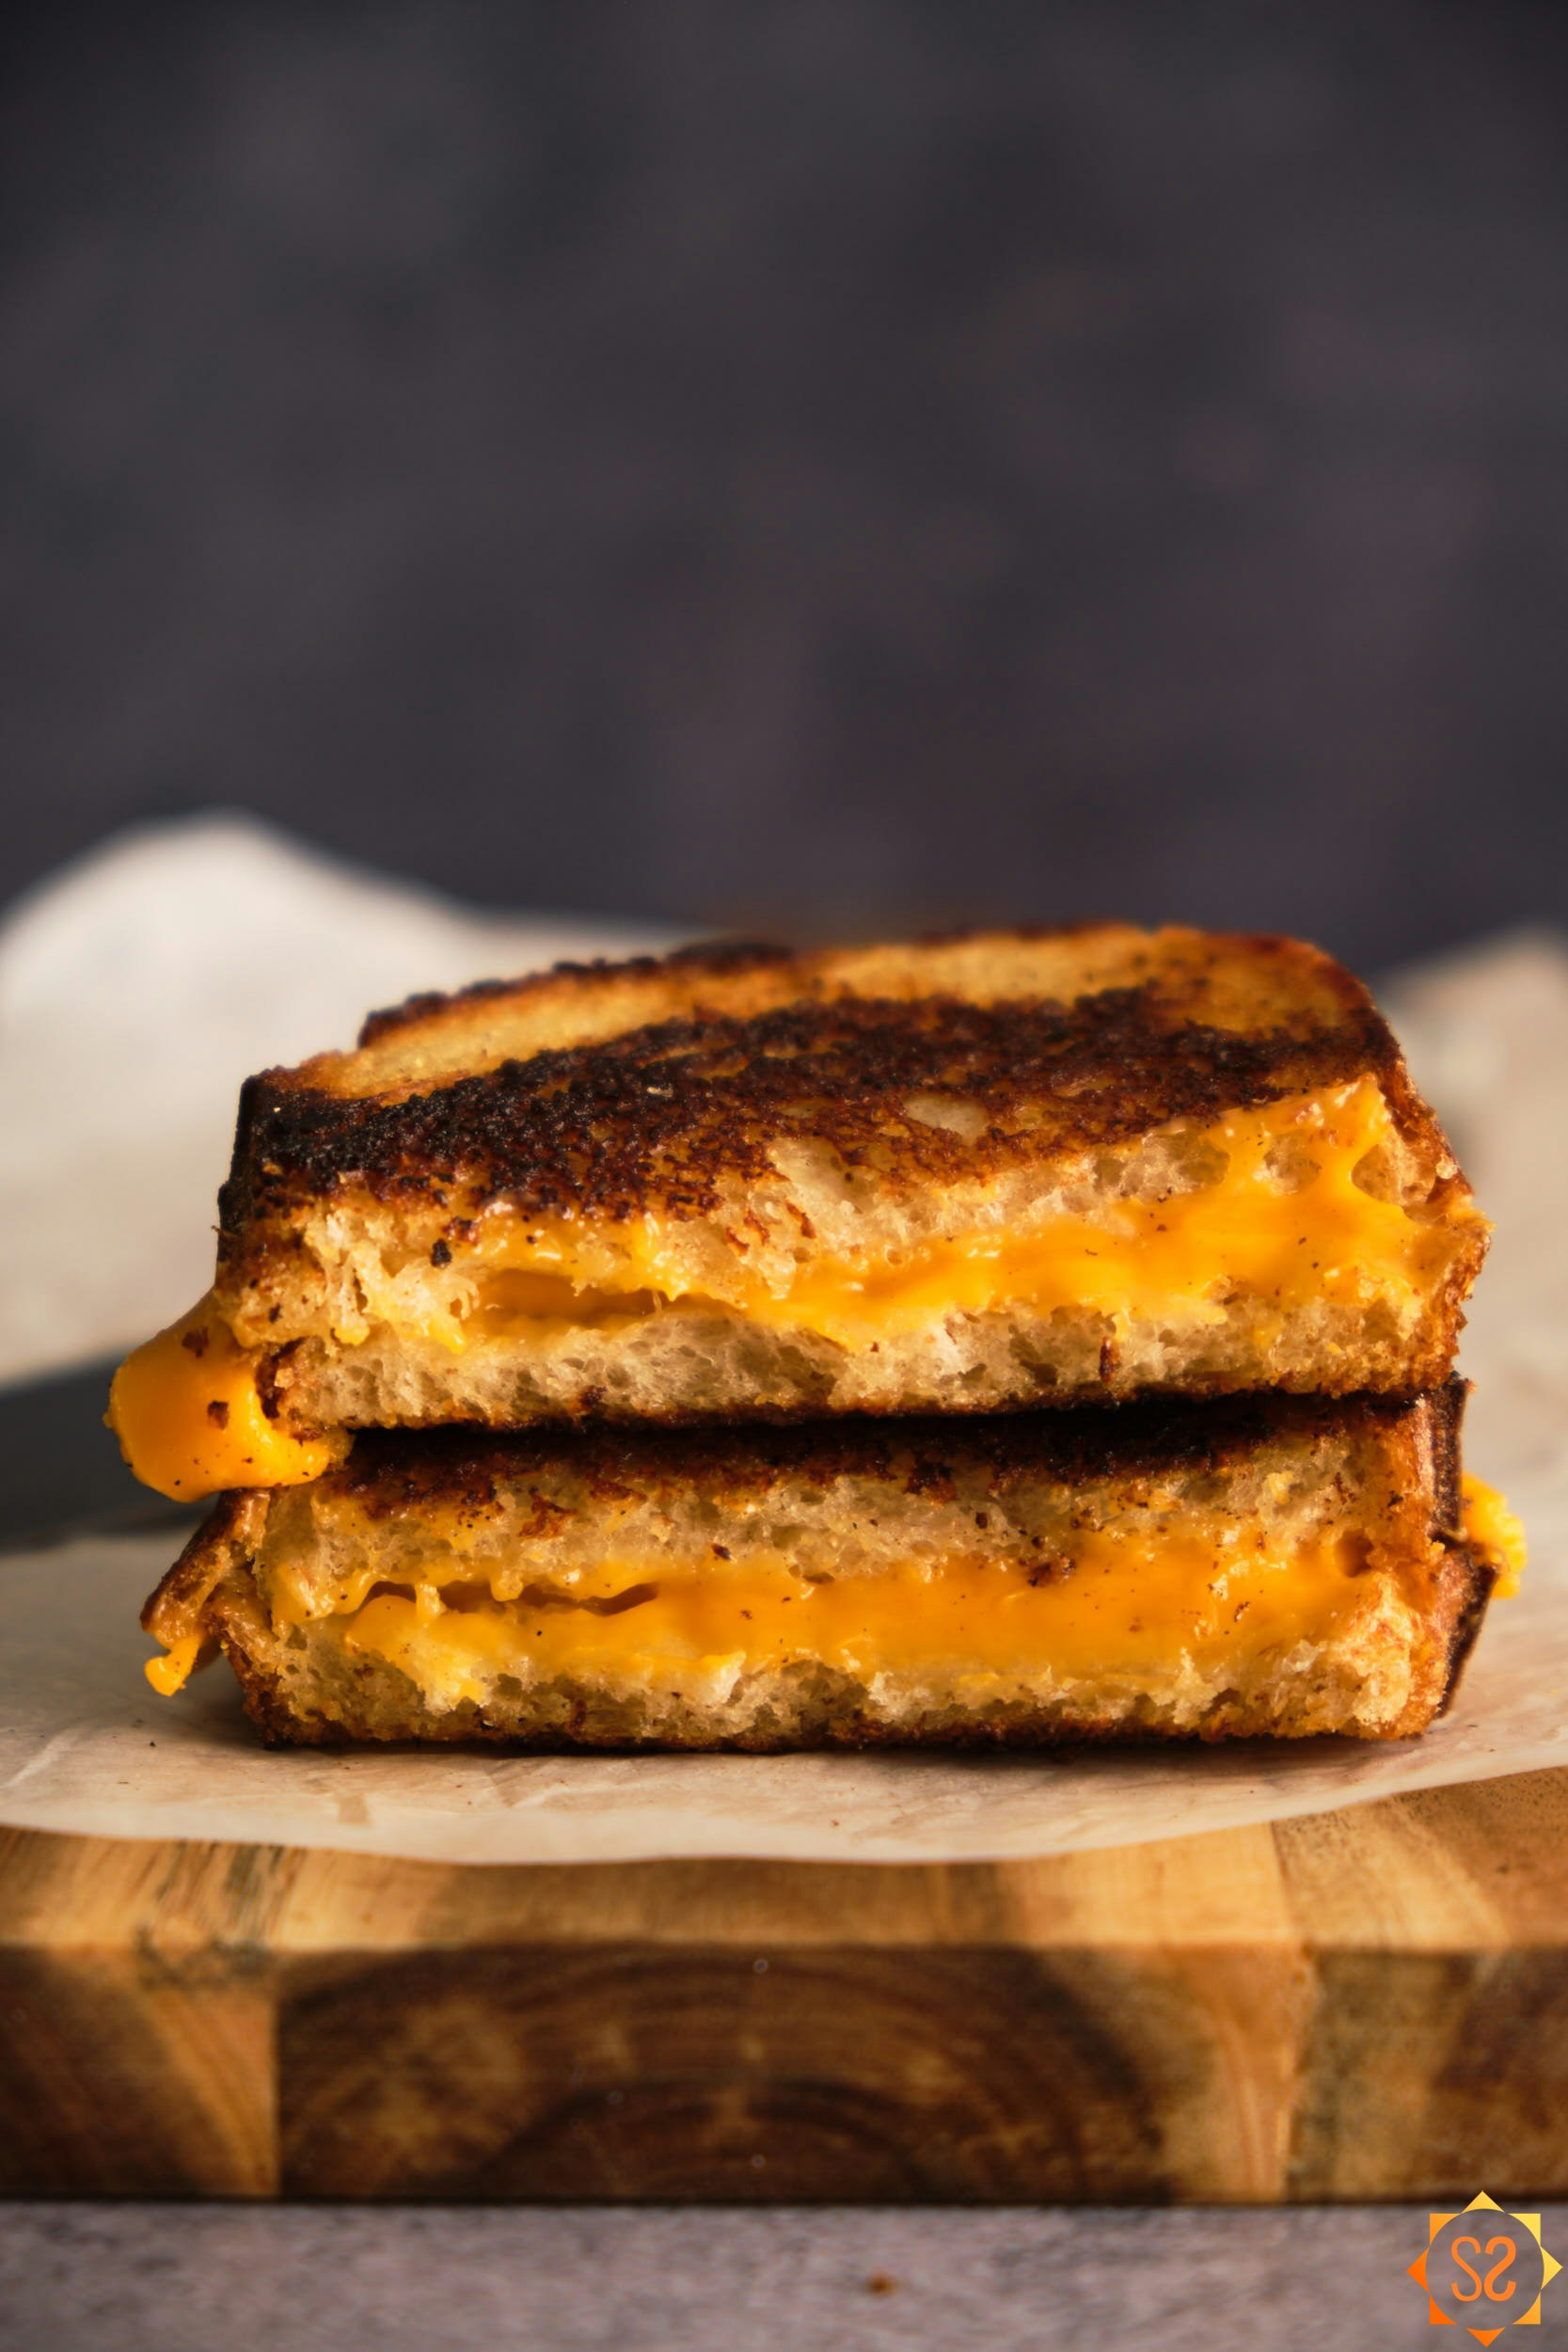 A side view of a grilled cheese sandwich made with 365 plant-based cheddar, stacked